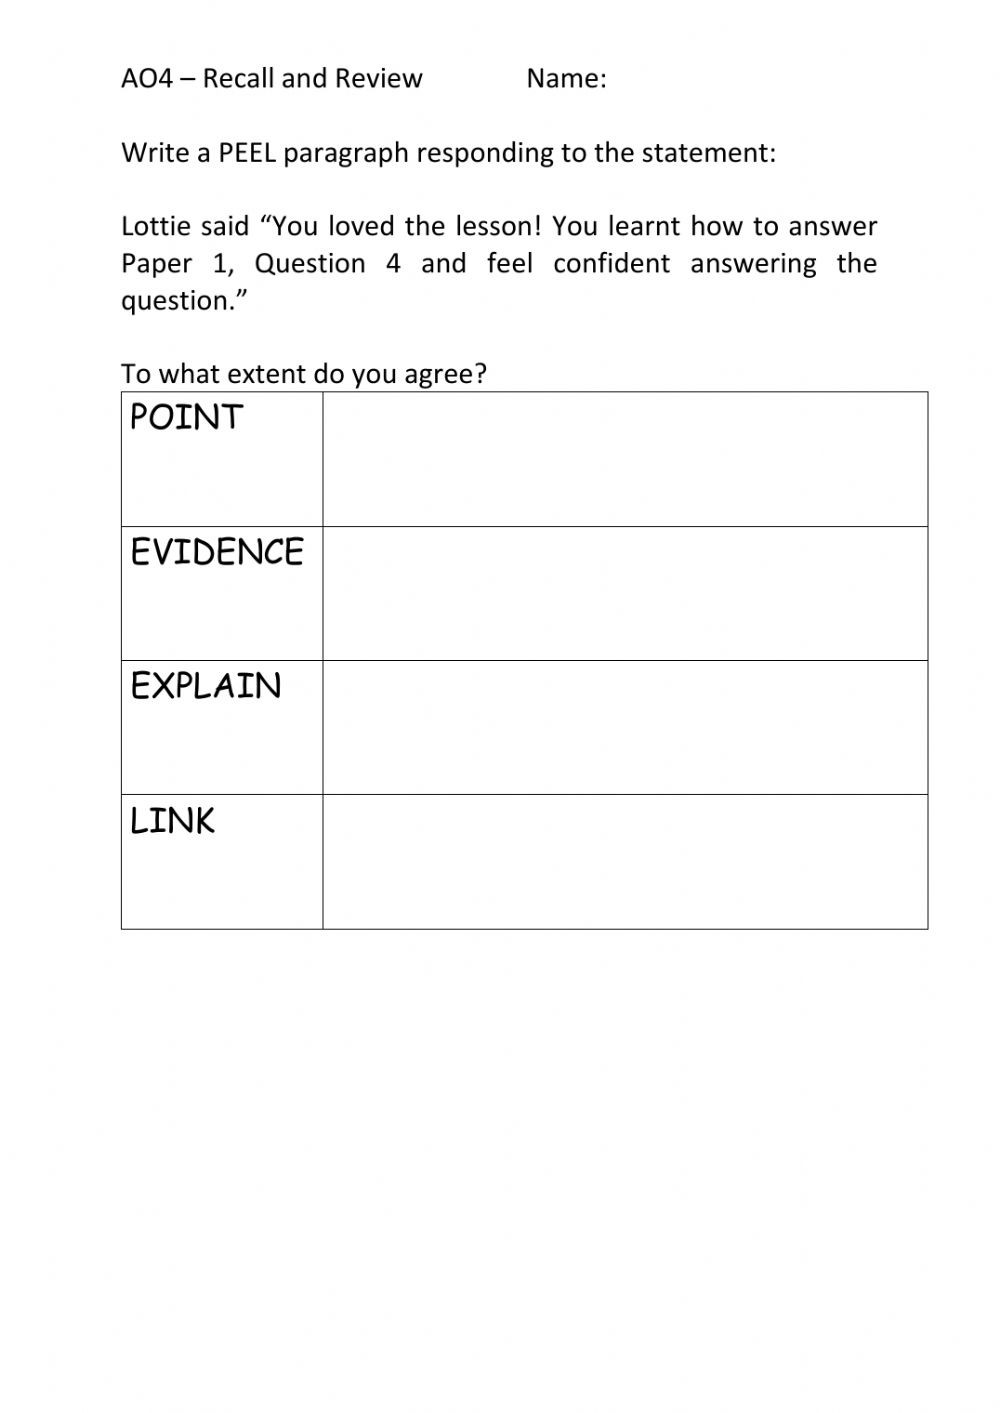 I Feel Statements Worksheet Recall and Review Ao4 to What Extent Do You Agree